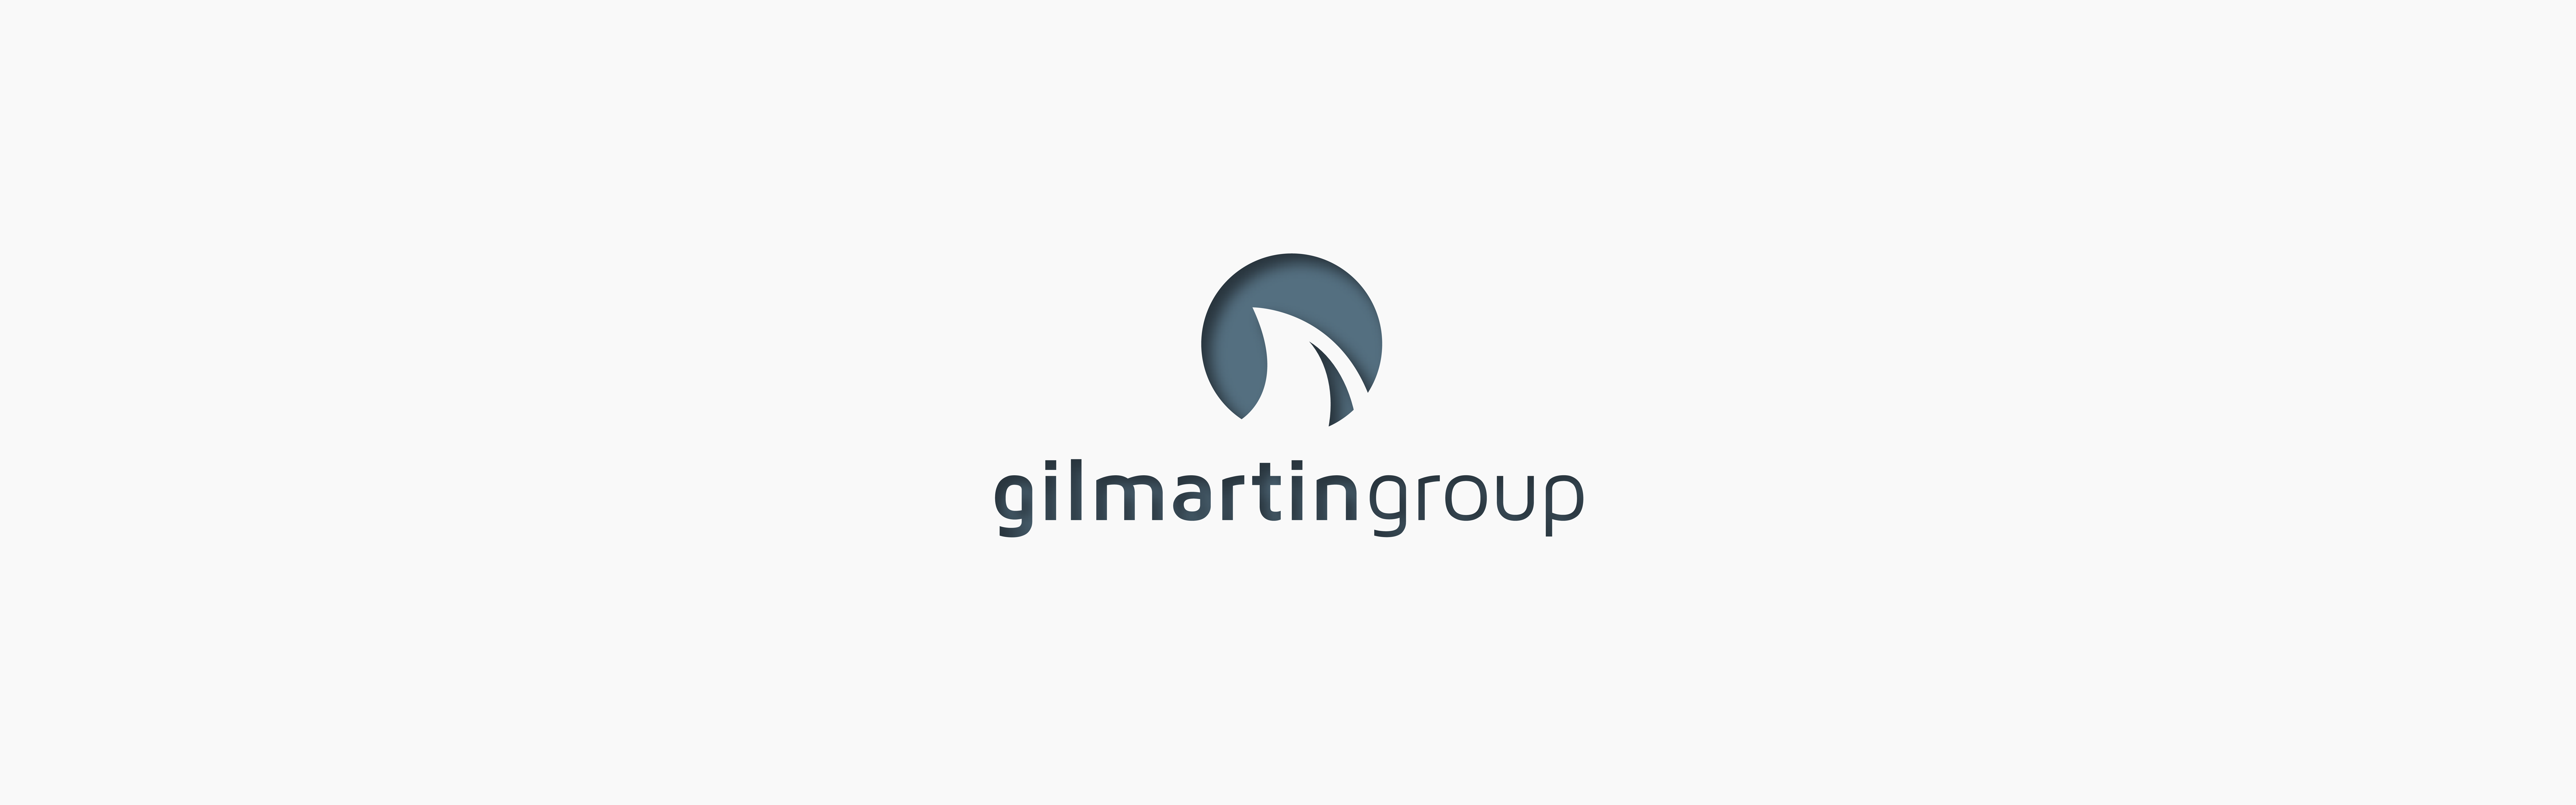 Logo of gilmartin group, featuring a stylized icon above the text "gilmartingroup".